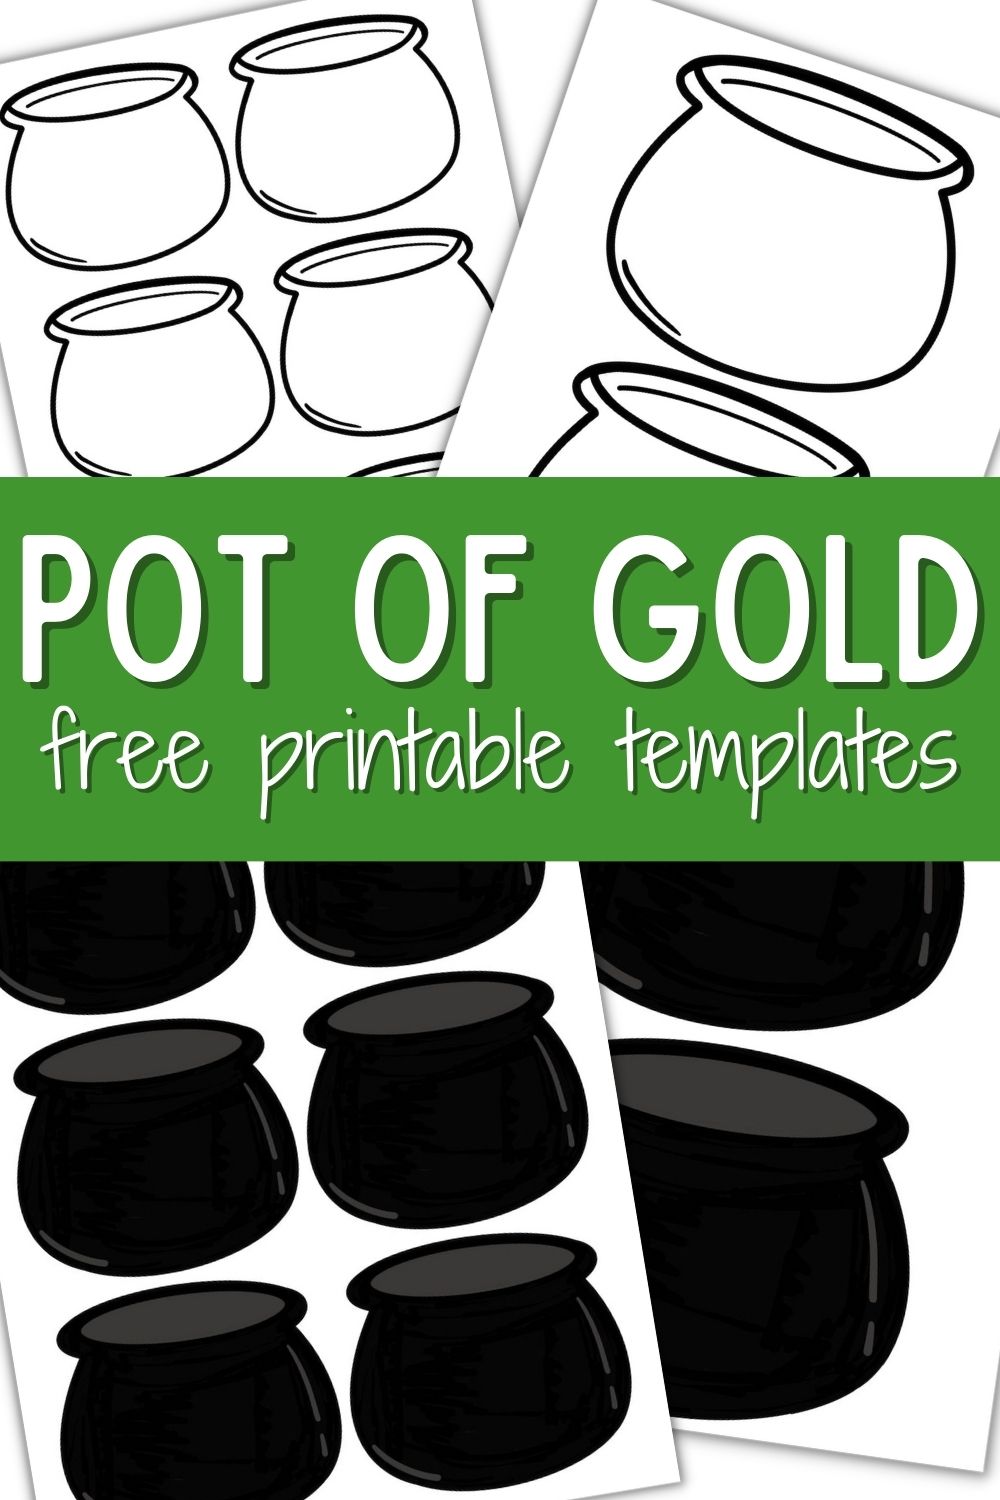 10-pot-of-gold-templates-perfect-for-st-patricks-day-crafts-originalmom